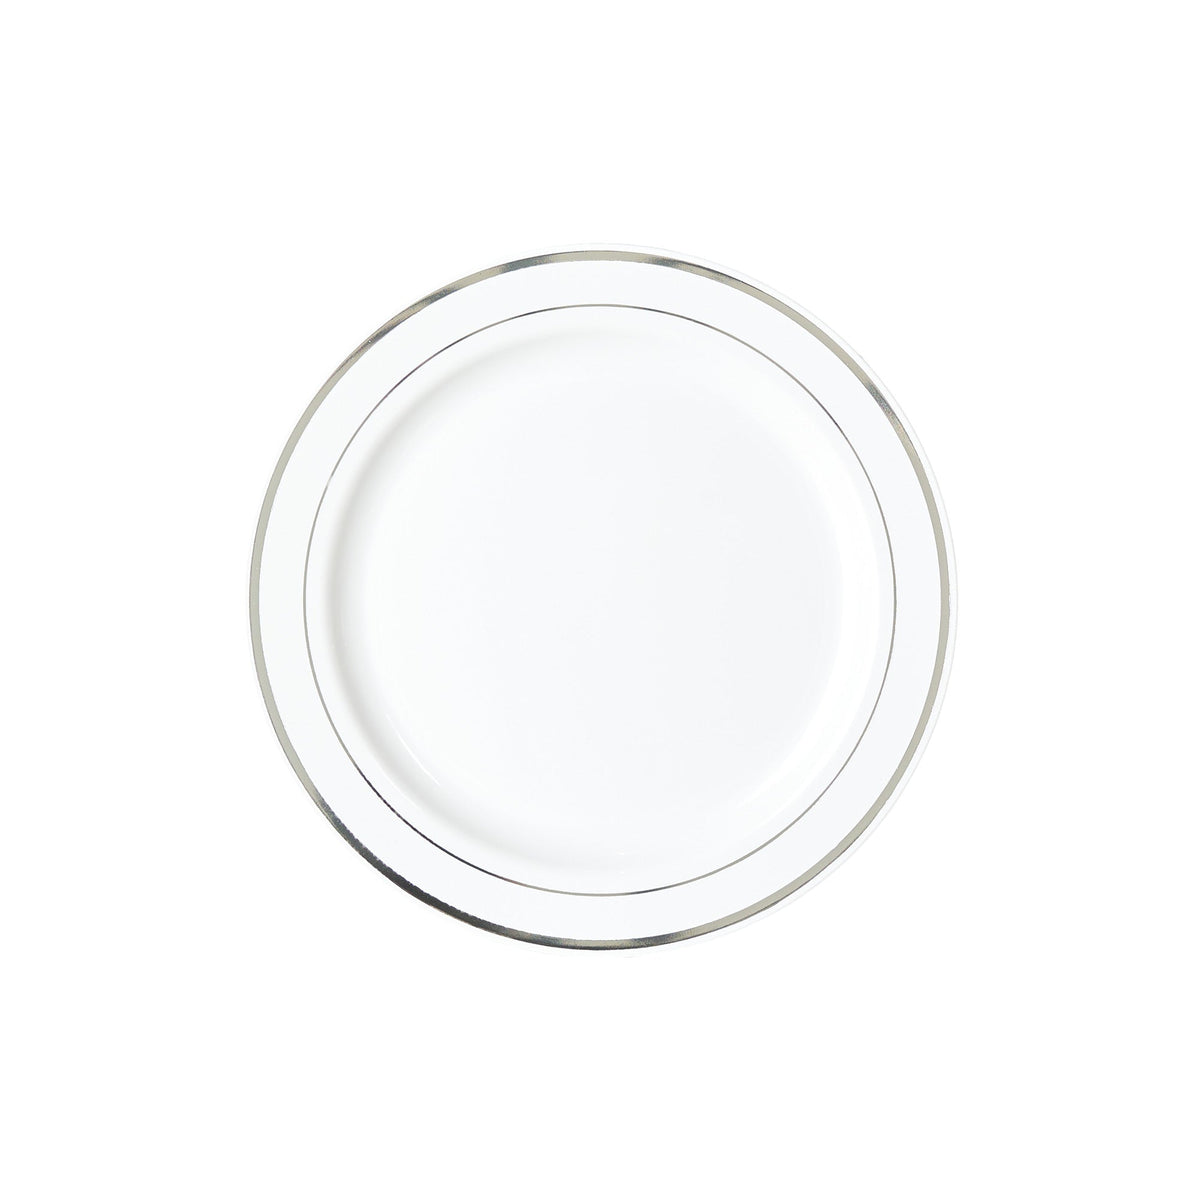 Ritch Import Disposable-Plasticware White Plates, 7 Inches, 10 Count 655731156739